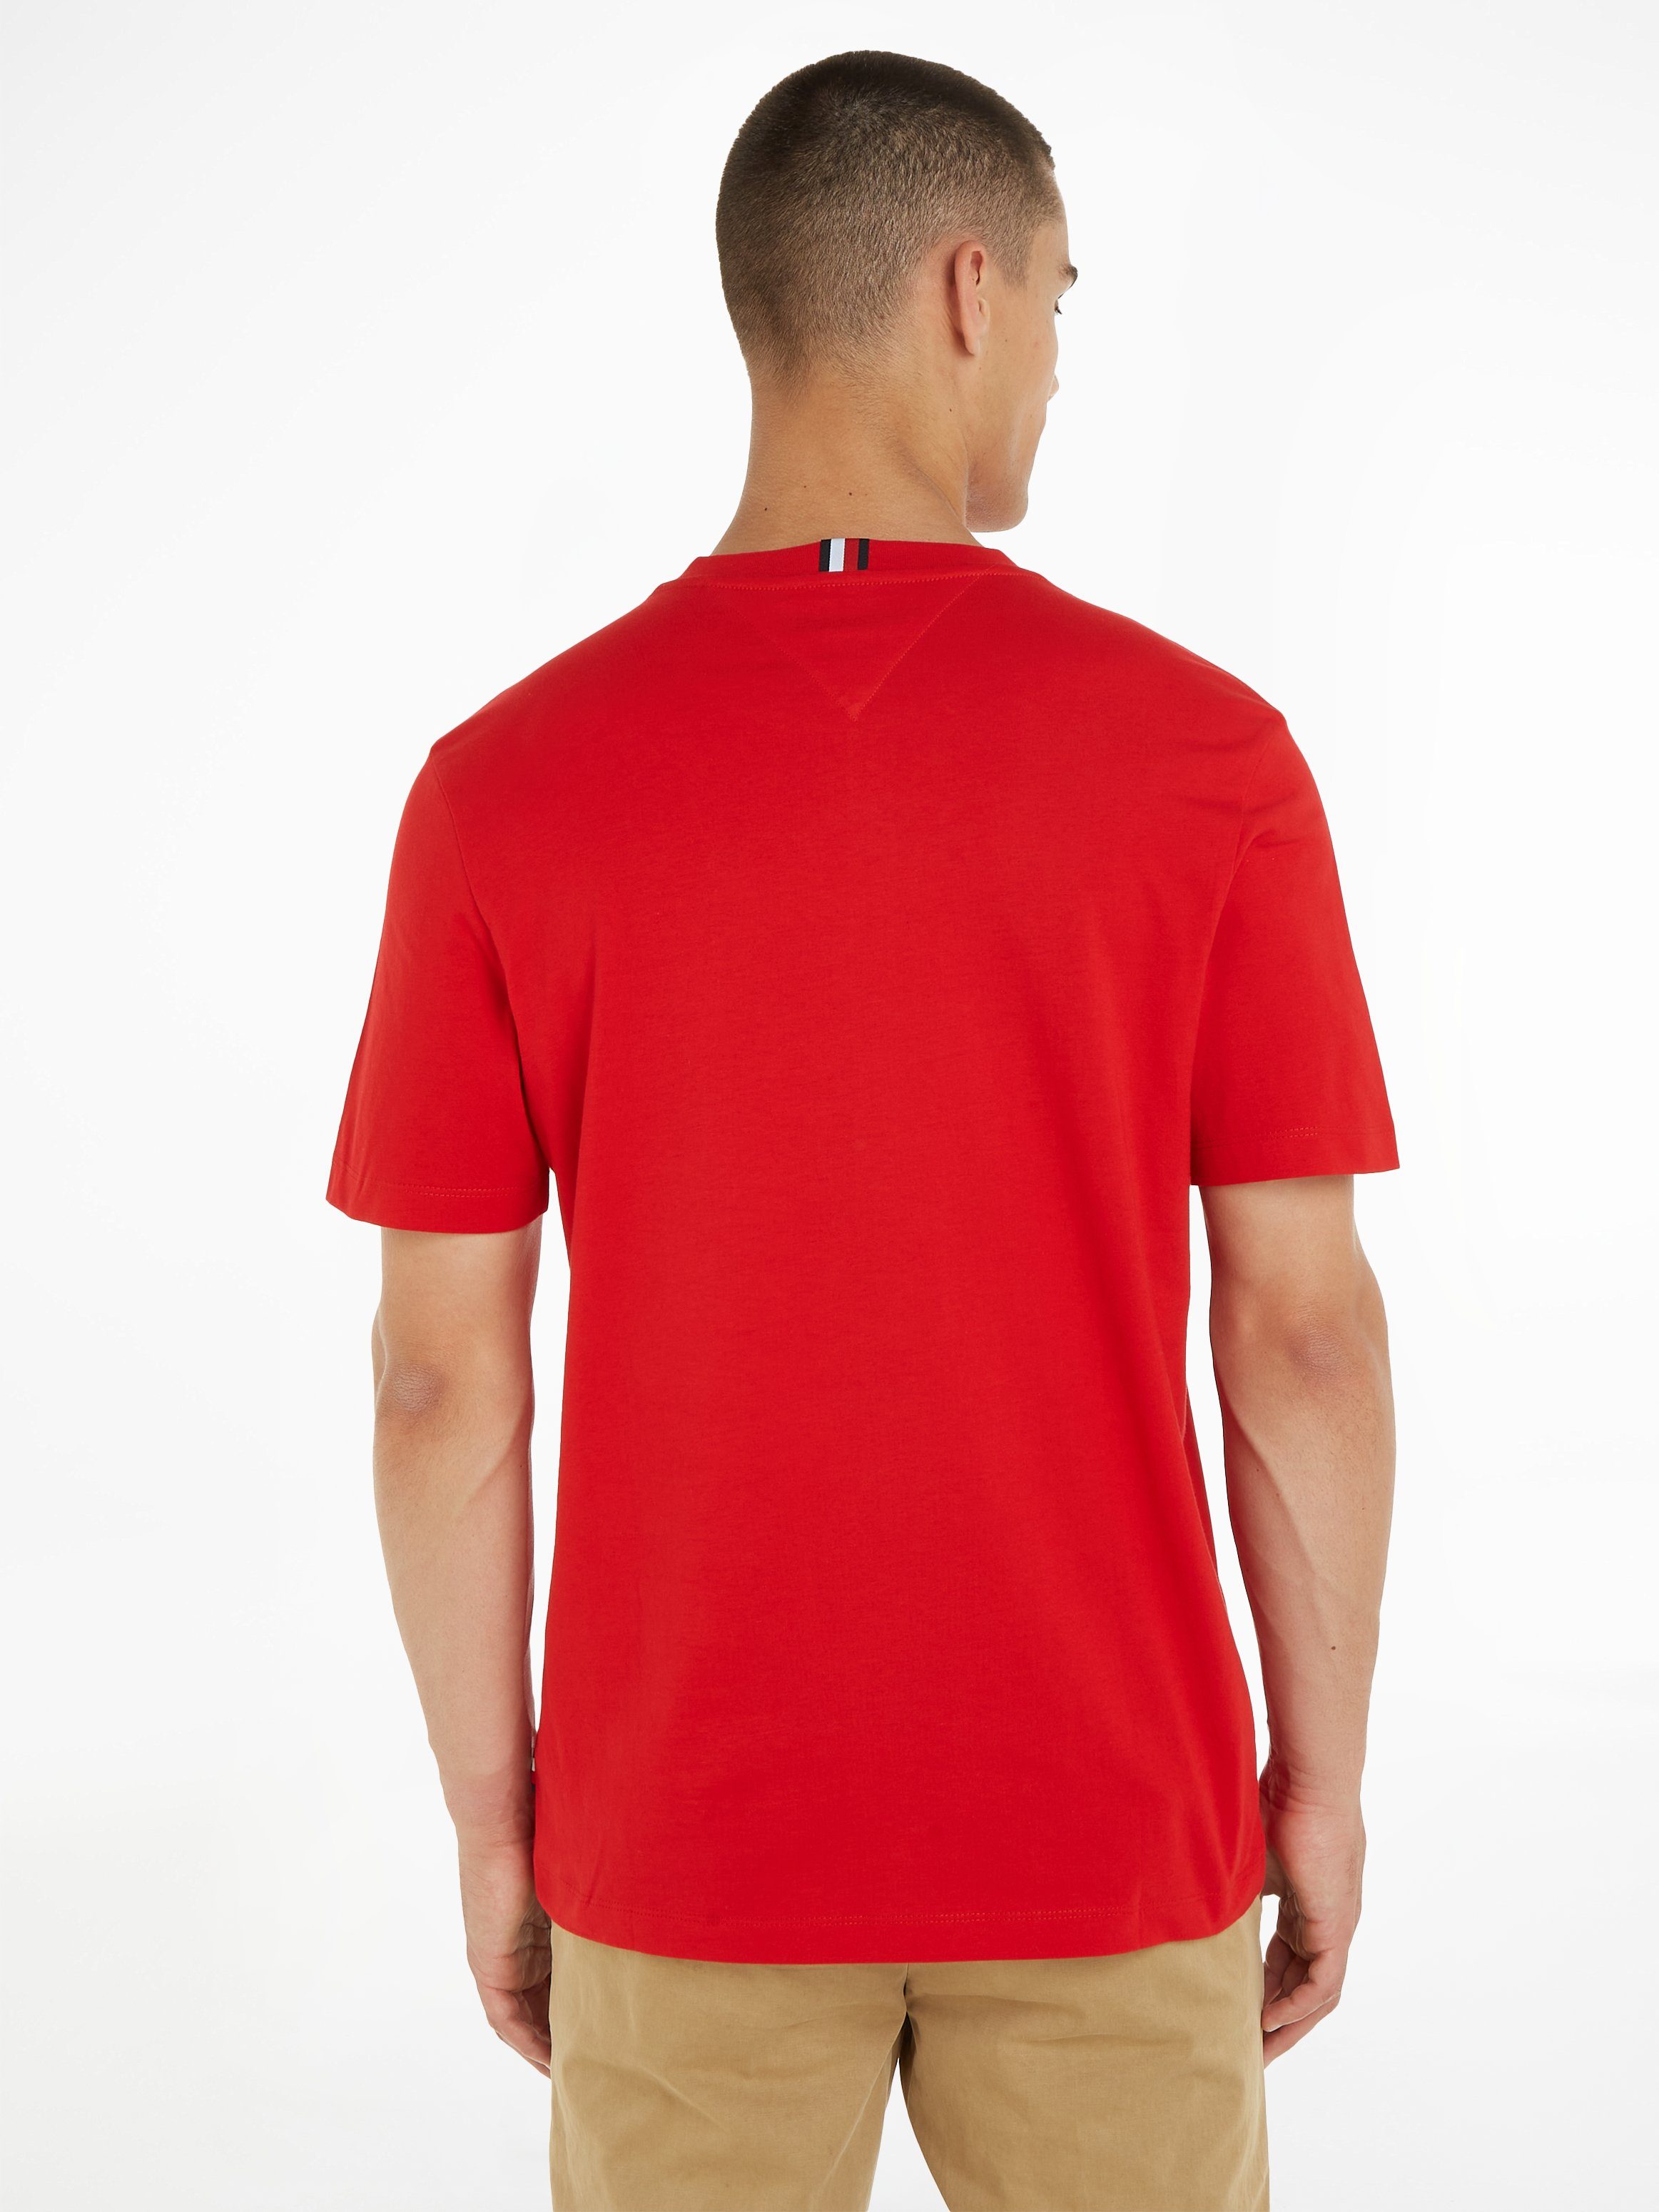 Red PRINT Tommy Hilfiger CHEST T-Shirt Primary TEE